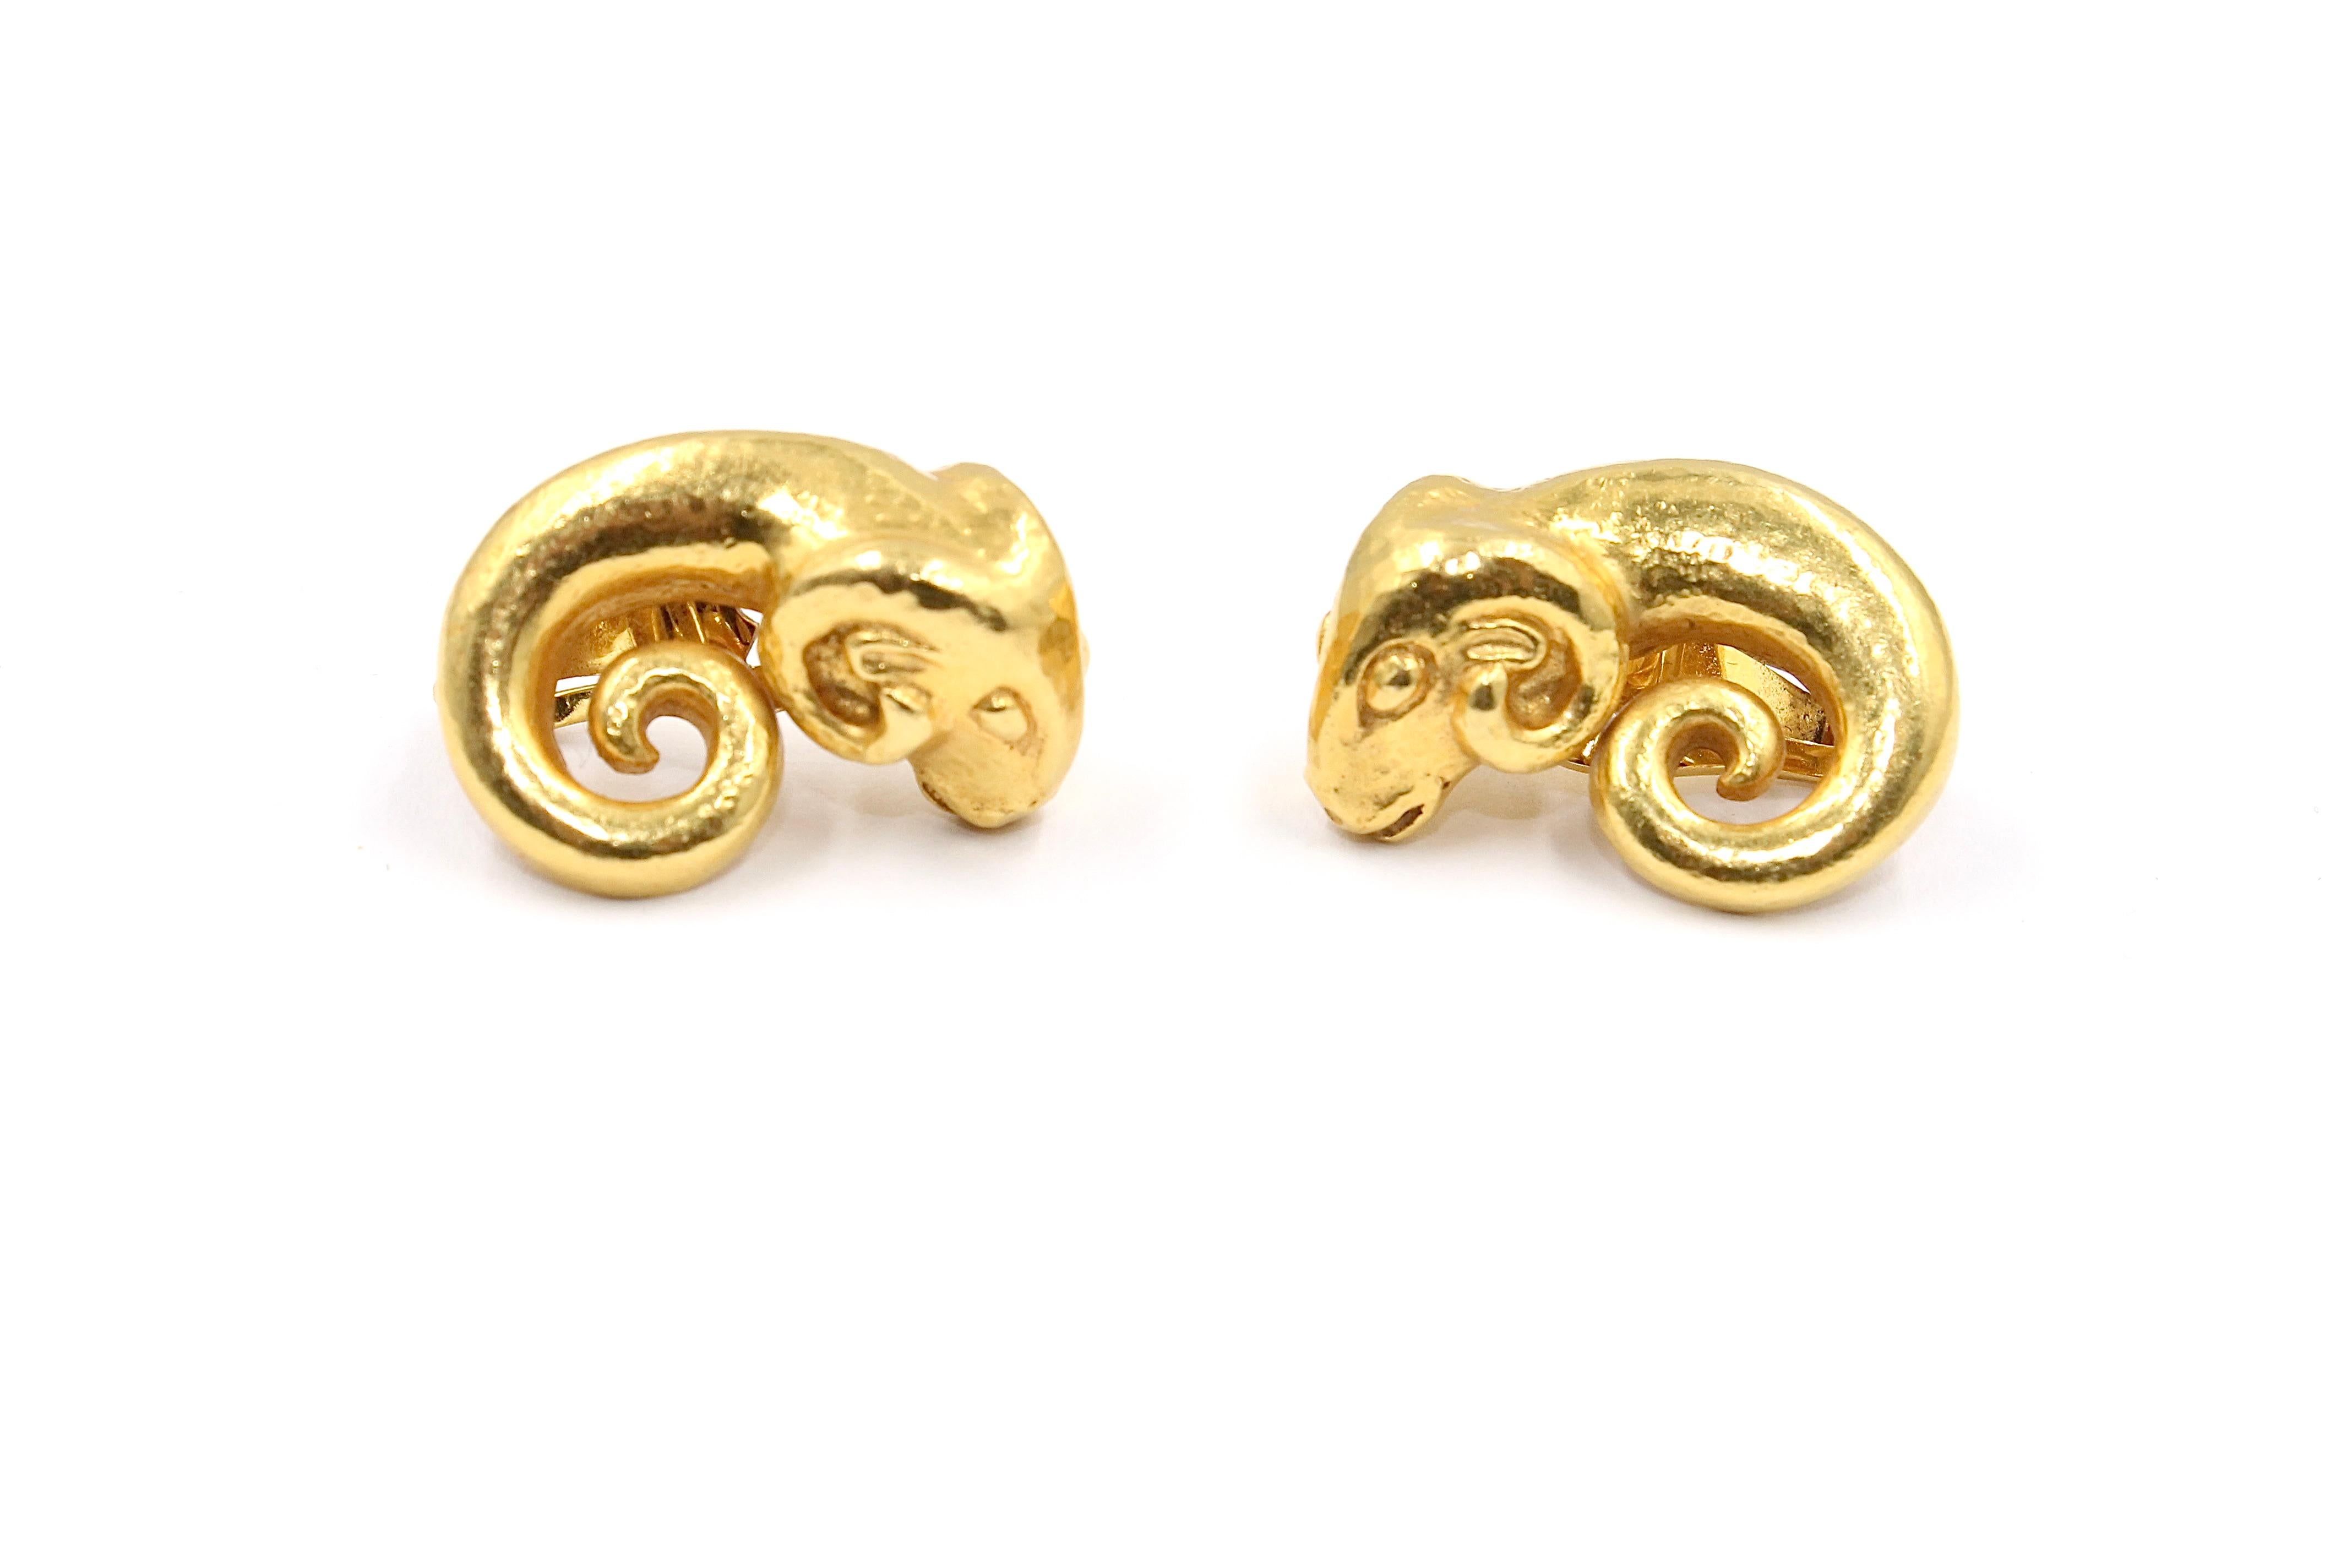 Ram earrings made of gold 22k signed by the famous Greek jeweler Zolotas. 

The earrings are with a clap closure but we can change it on demand and make an alpa closure for ear holes. 

circa 1980-1990

Weight: 23.8 grams 

The Greek firm of Zolotas